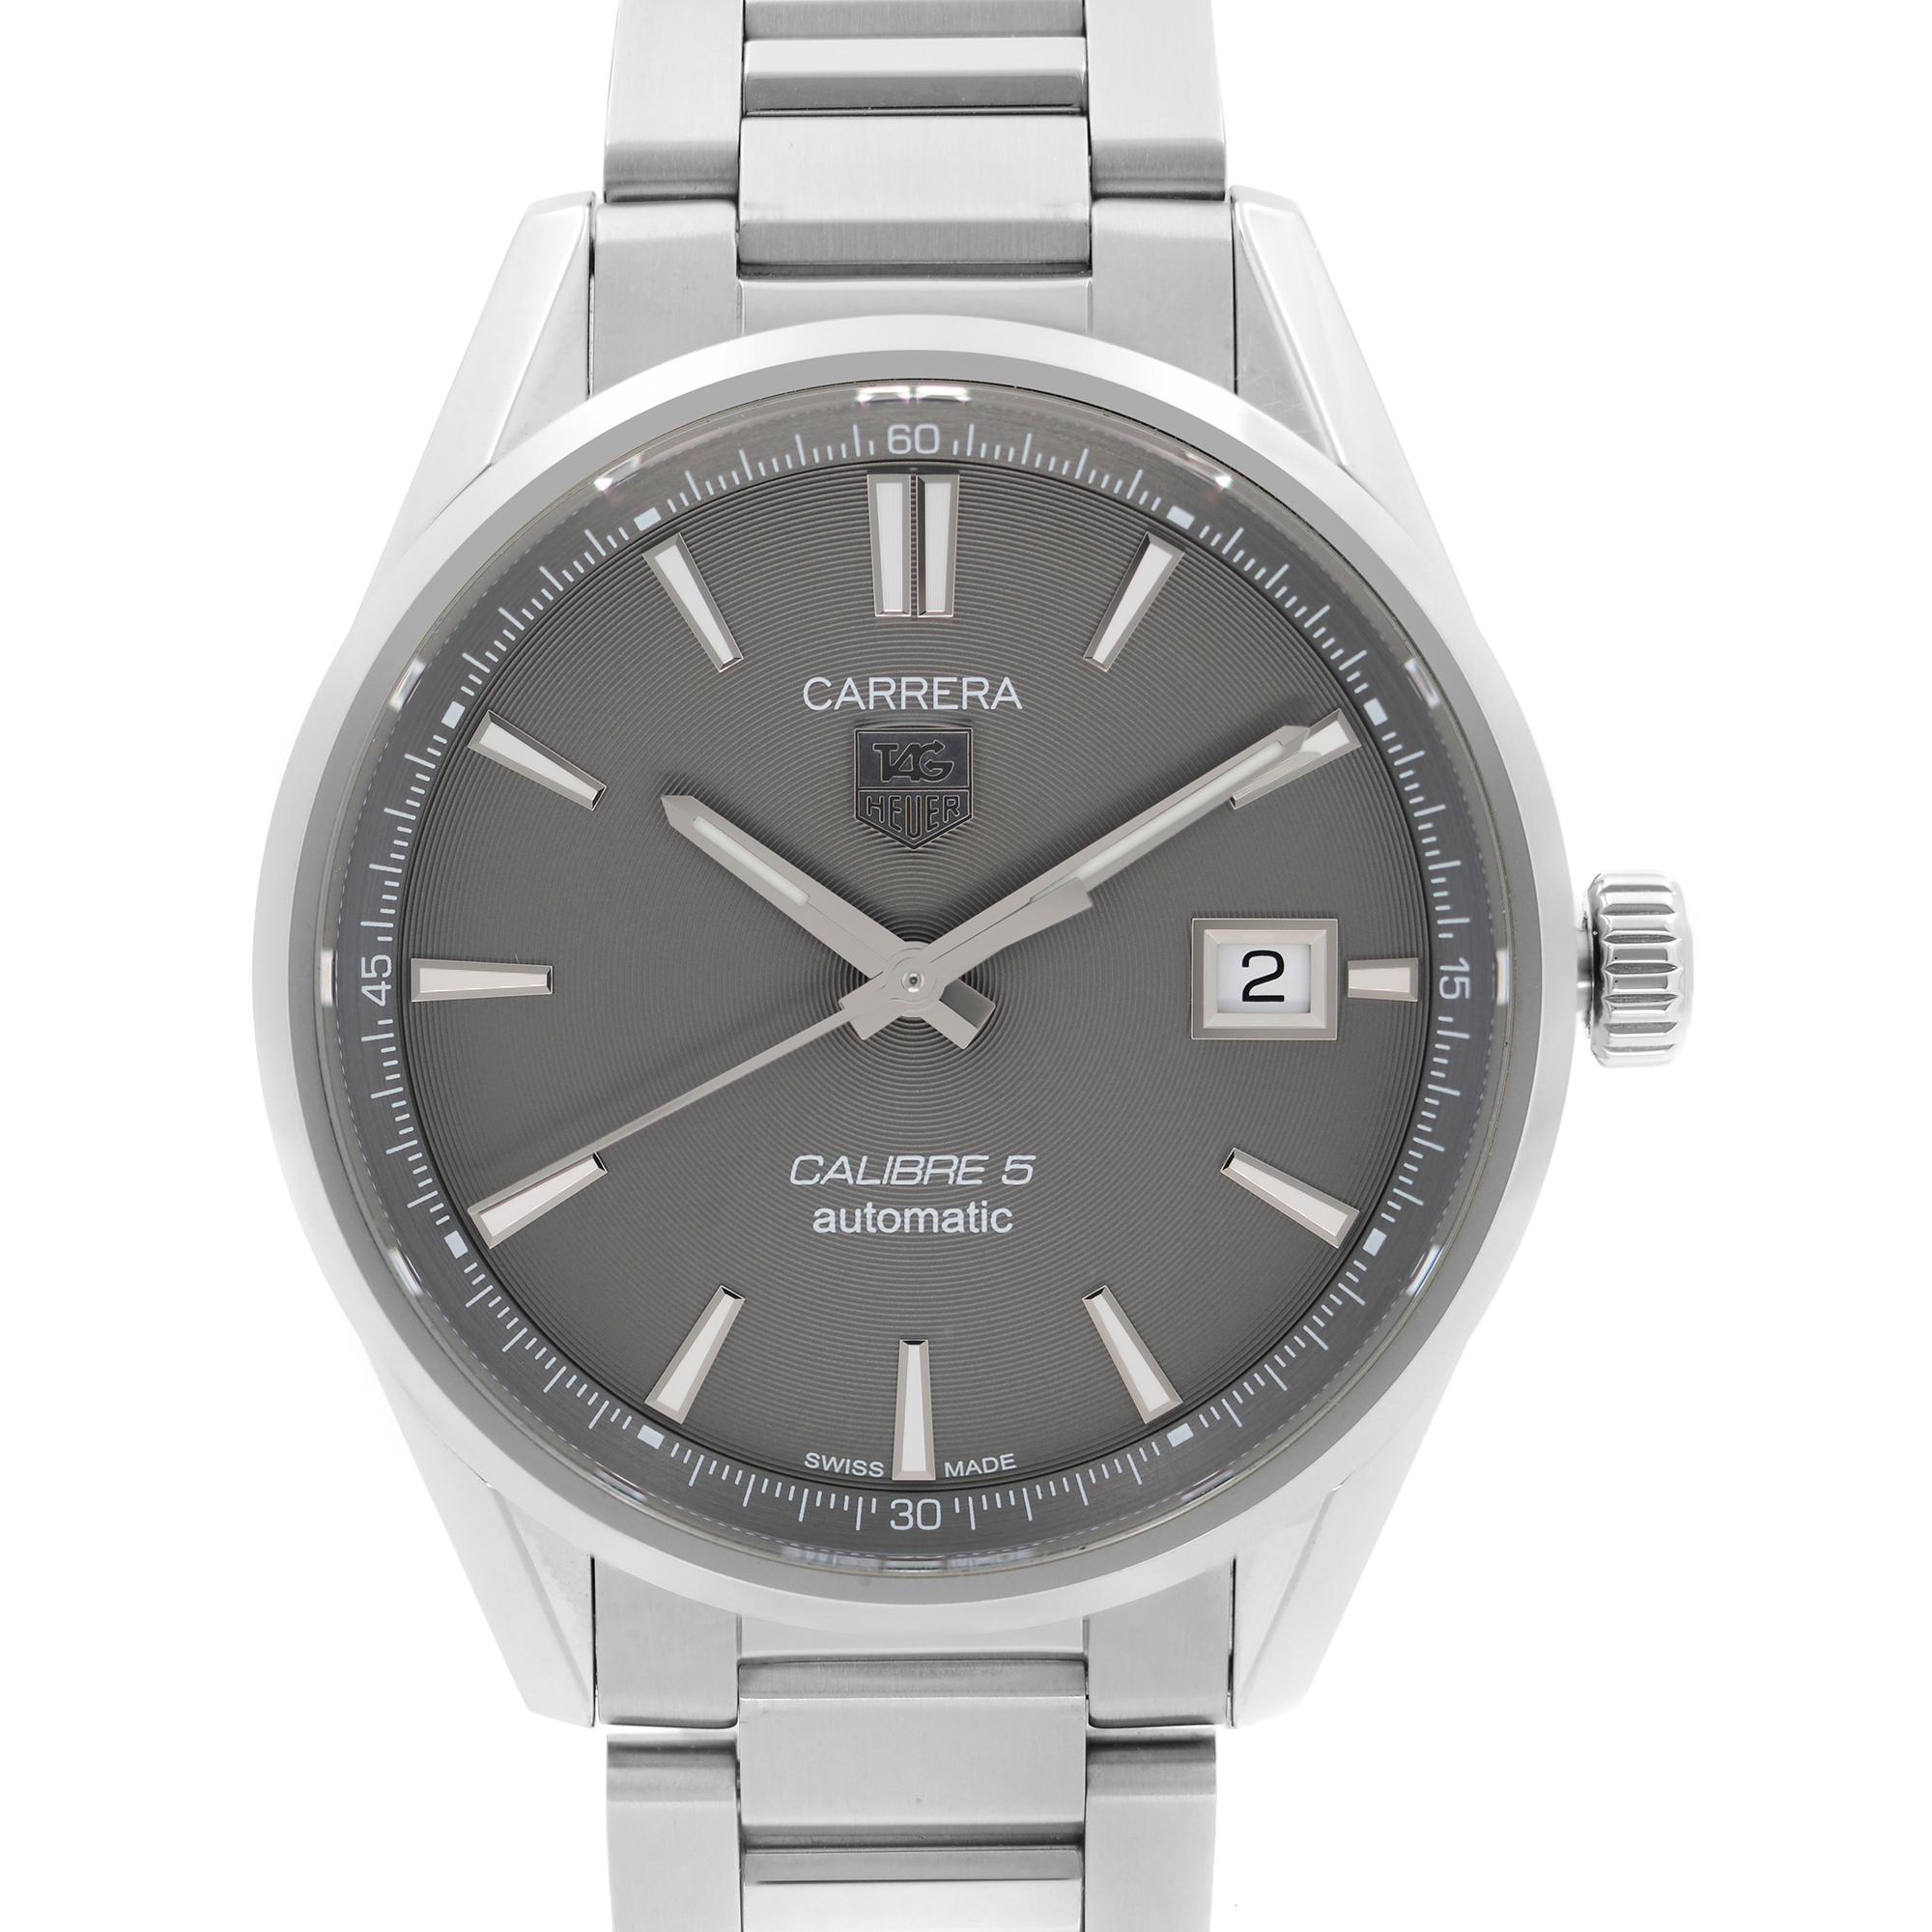 Display Model TAG Heuer Carrera Stainless Steel Grey Dial Automatic Men's Watch WAR211C. This Beautiful Timepiece Features: Stainless Steel Case & Bracelet, Fixed Stainless Steel Bezel, Gray Dial With Luminous Silver-Tone Hands, and Index Hour